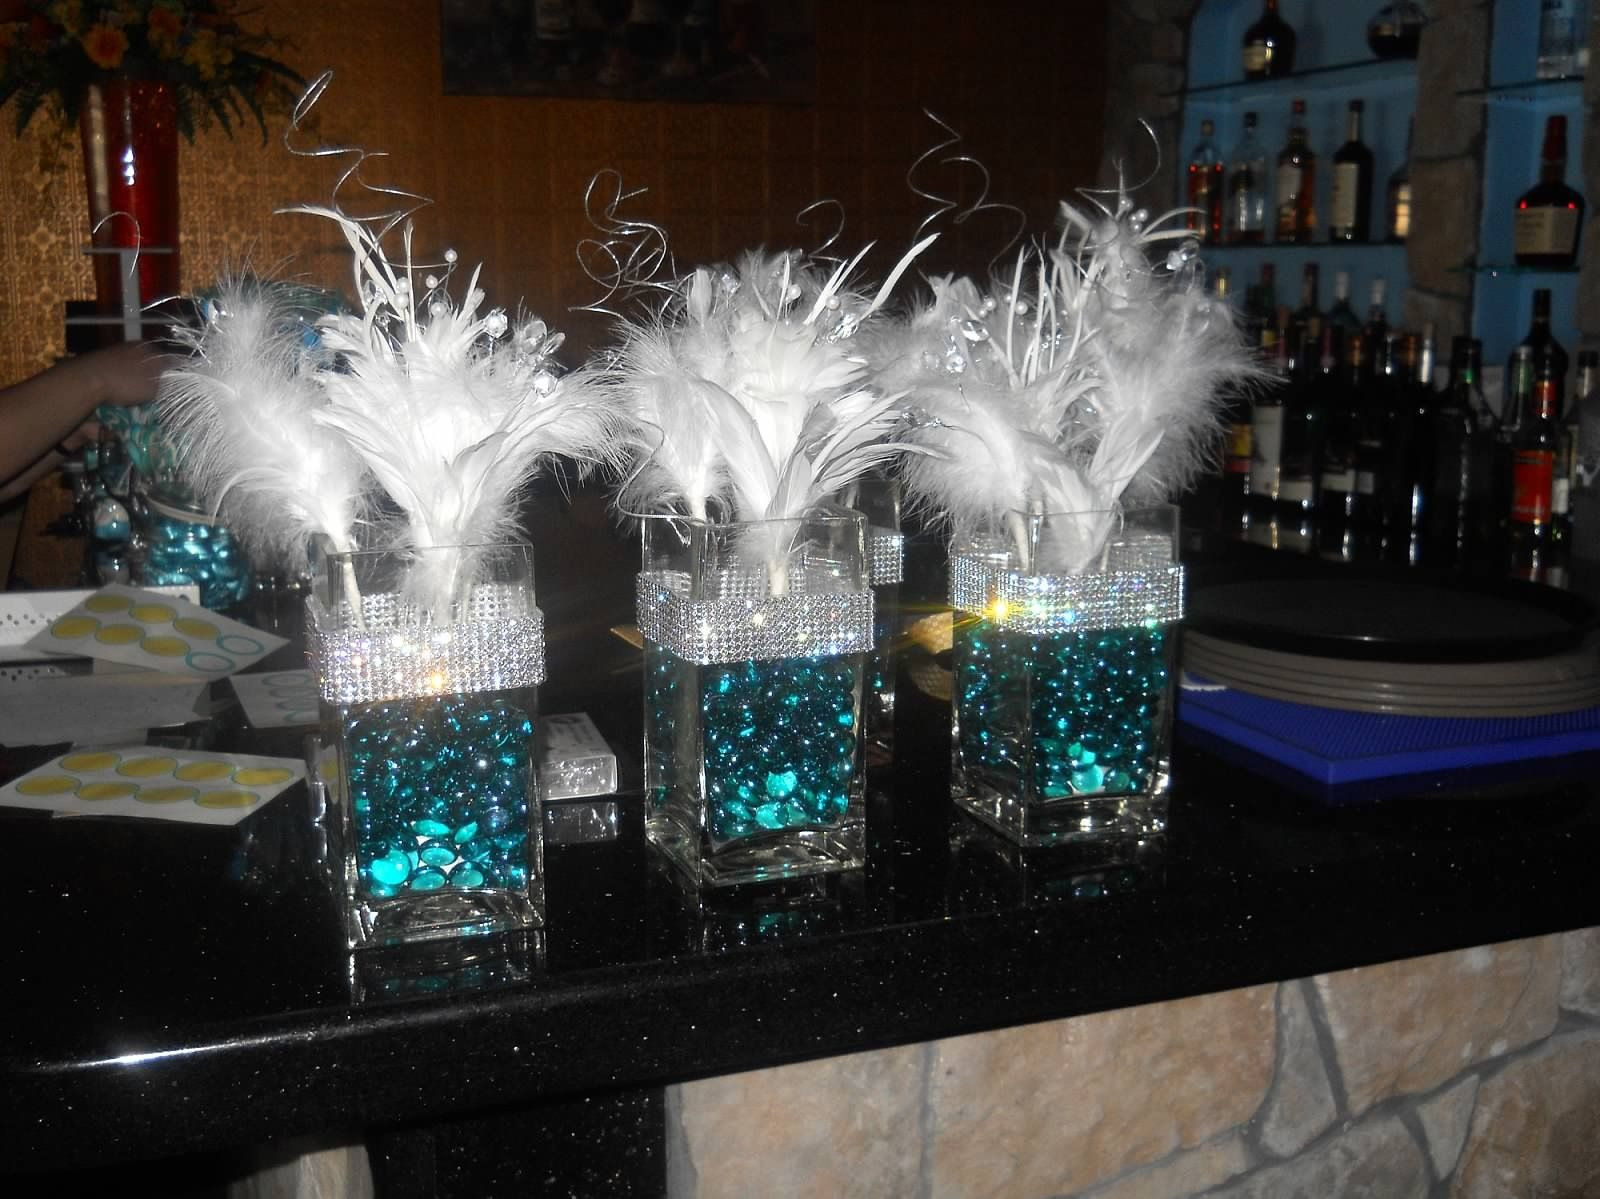 vase filler beads michaels of tiffany themed centerpieces for 30th birthday glass vases were throughout glass vases were purchased online from a glassware and floral website green filler beads were purchased at ac moore feather flowers and silver picks were